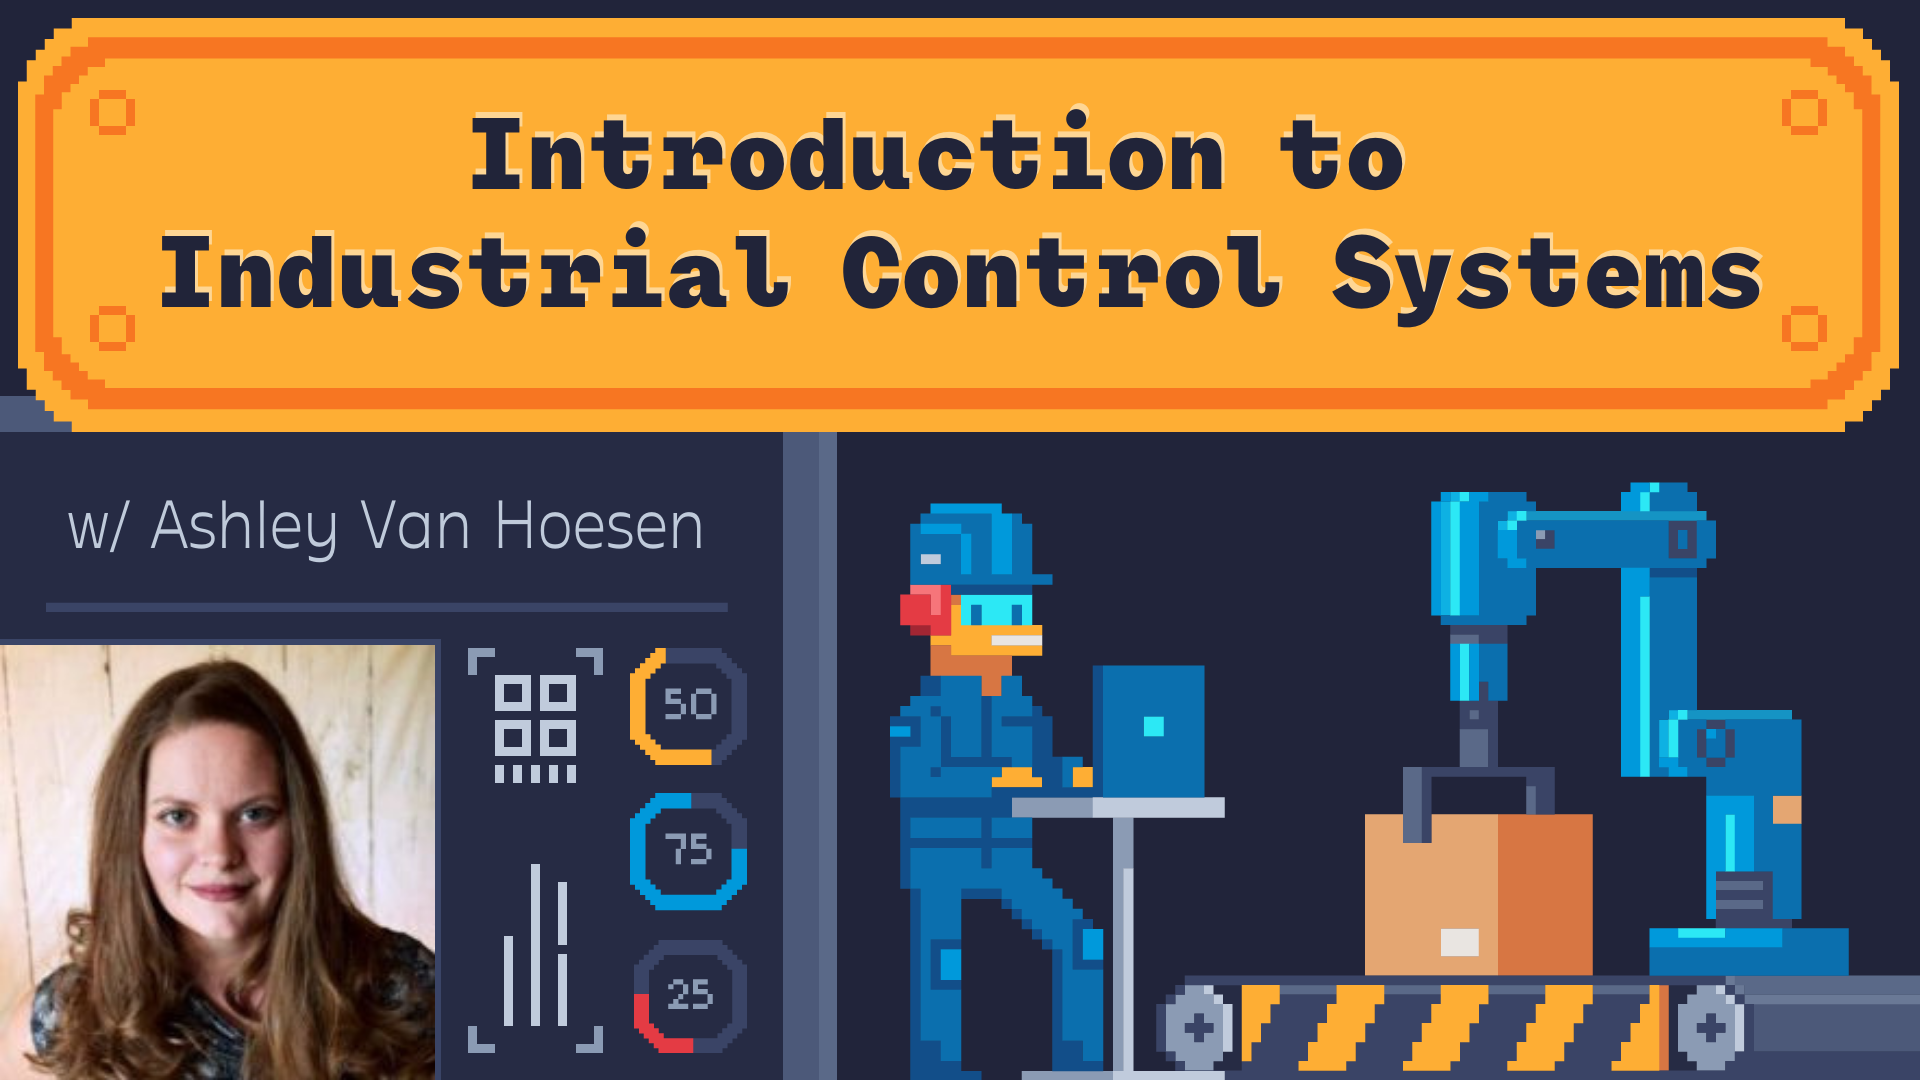 Introduction to Industrial Control Systems with Ashley Van Hoesen